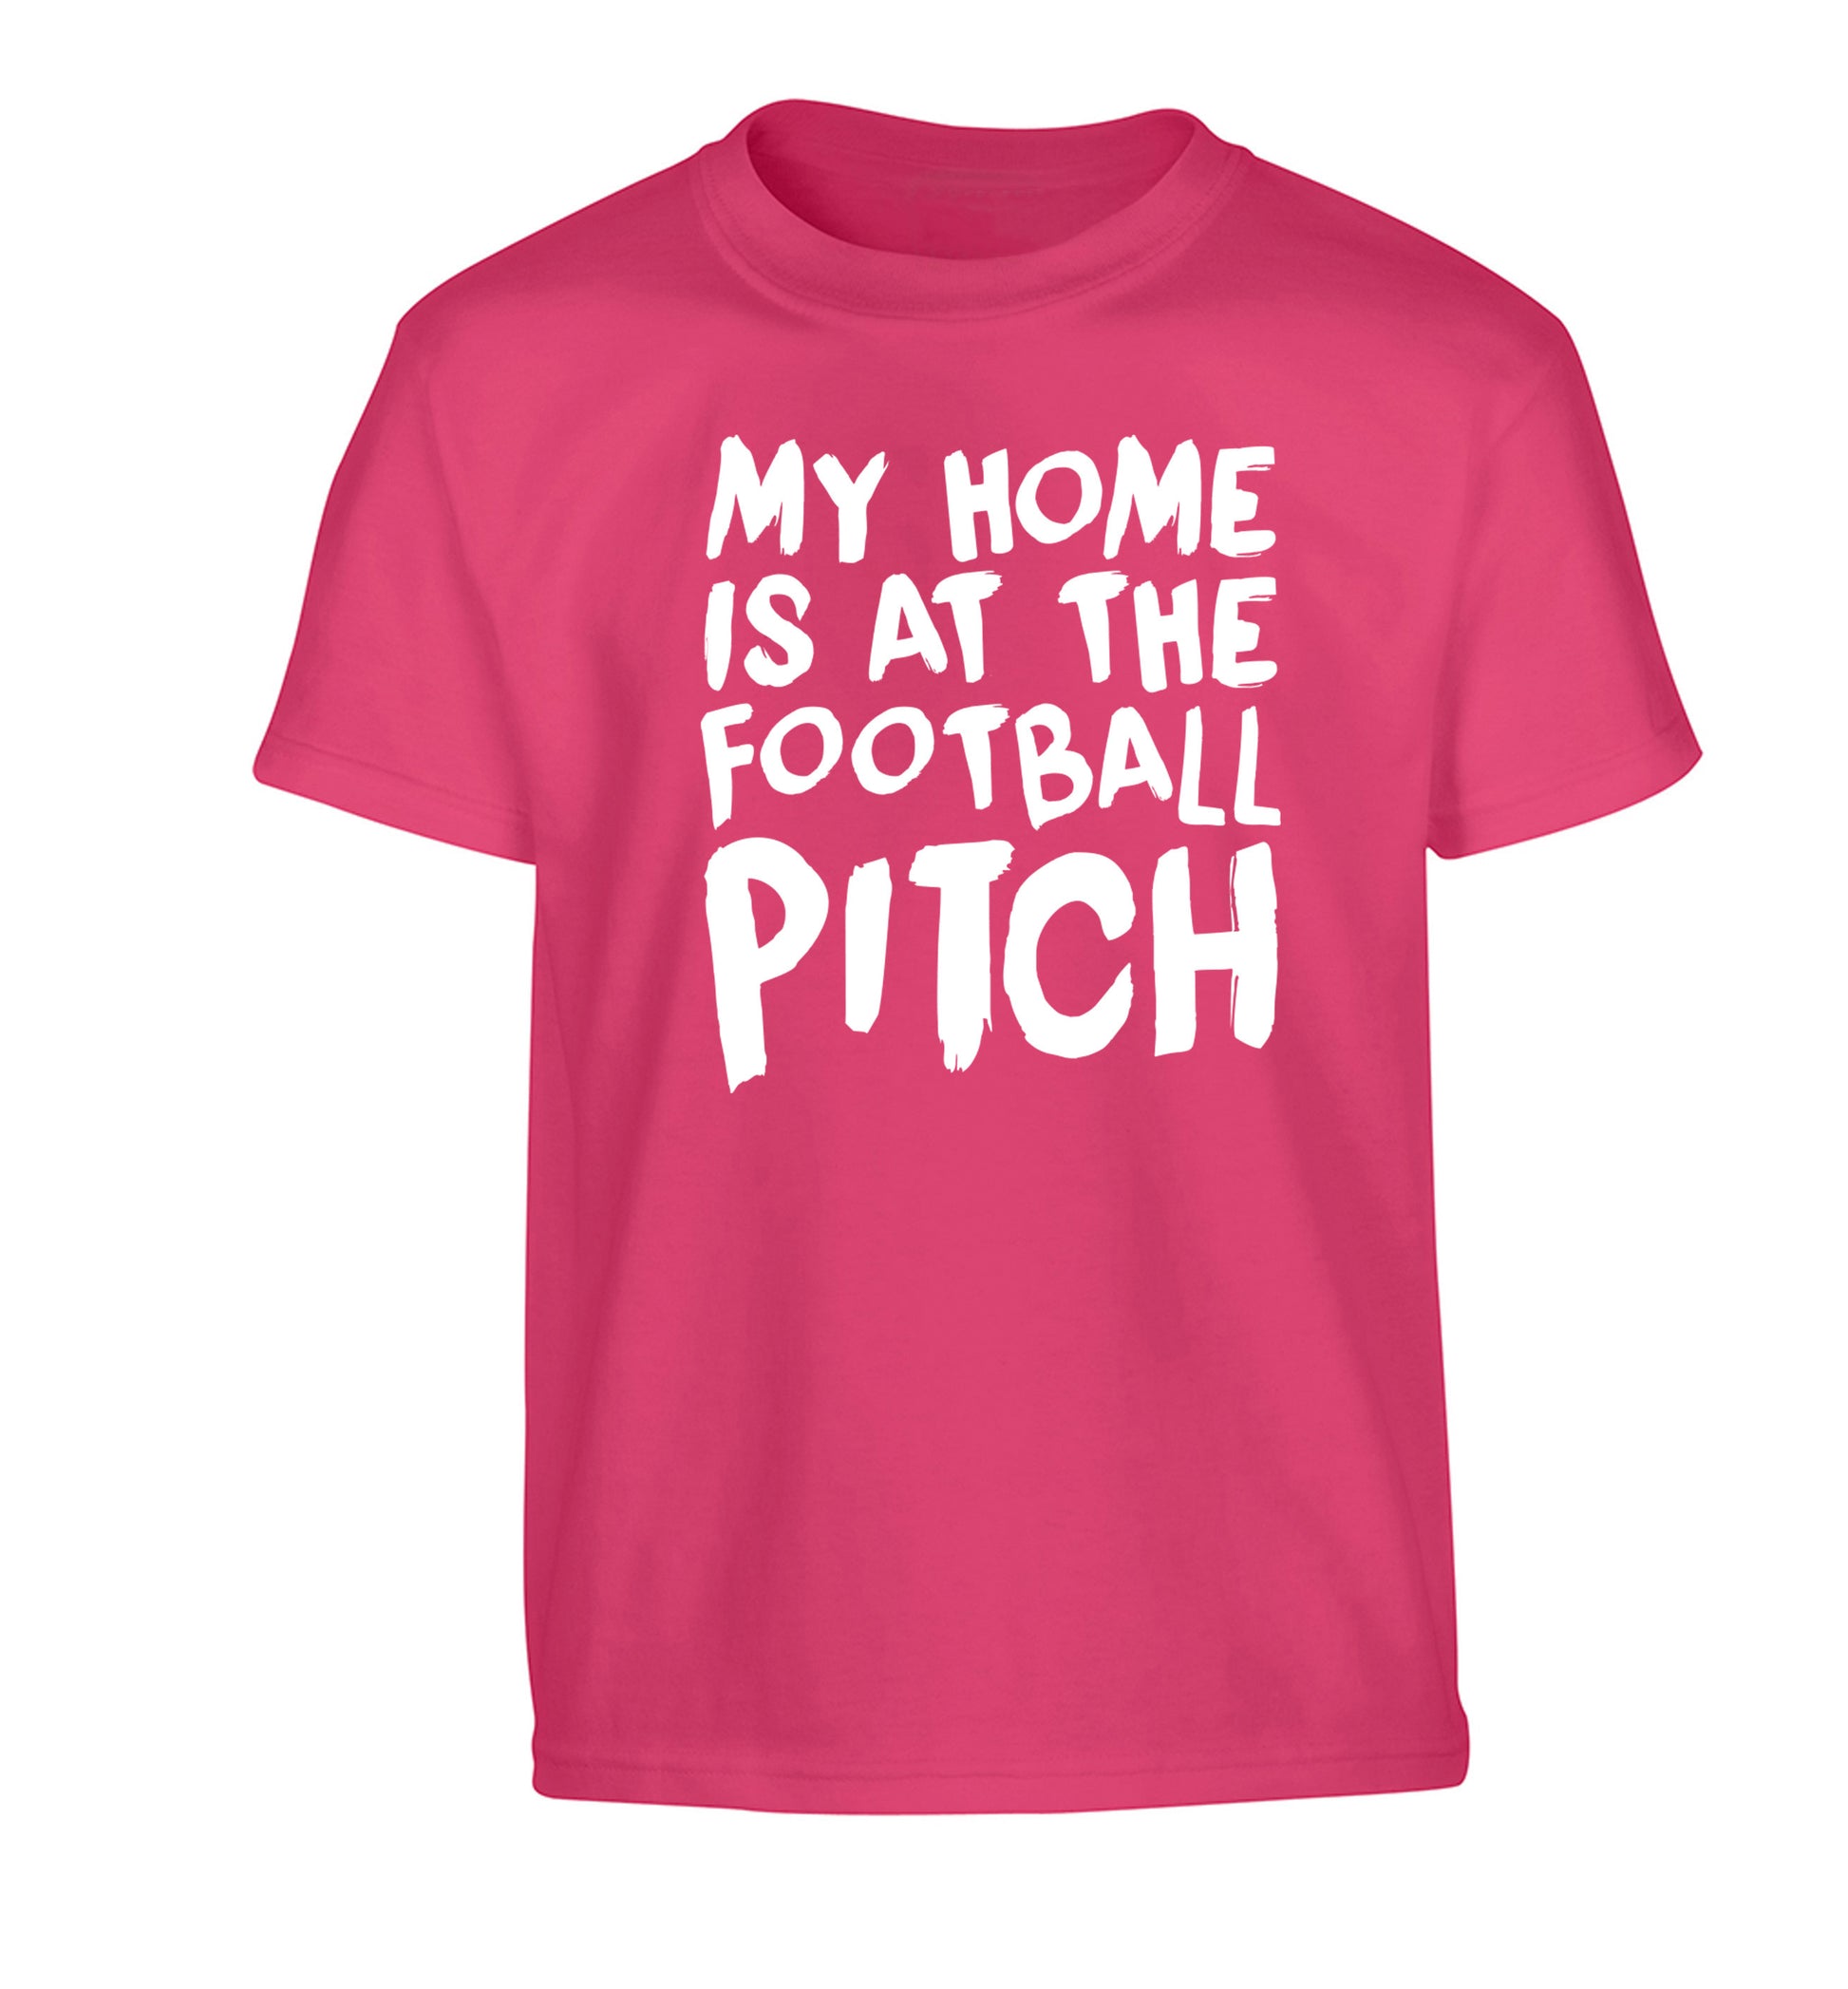 My home is at the football pitch Children's pink Tshirt 12-14 Years